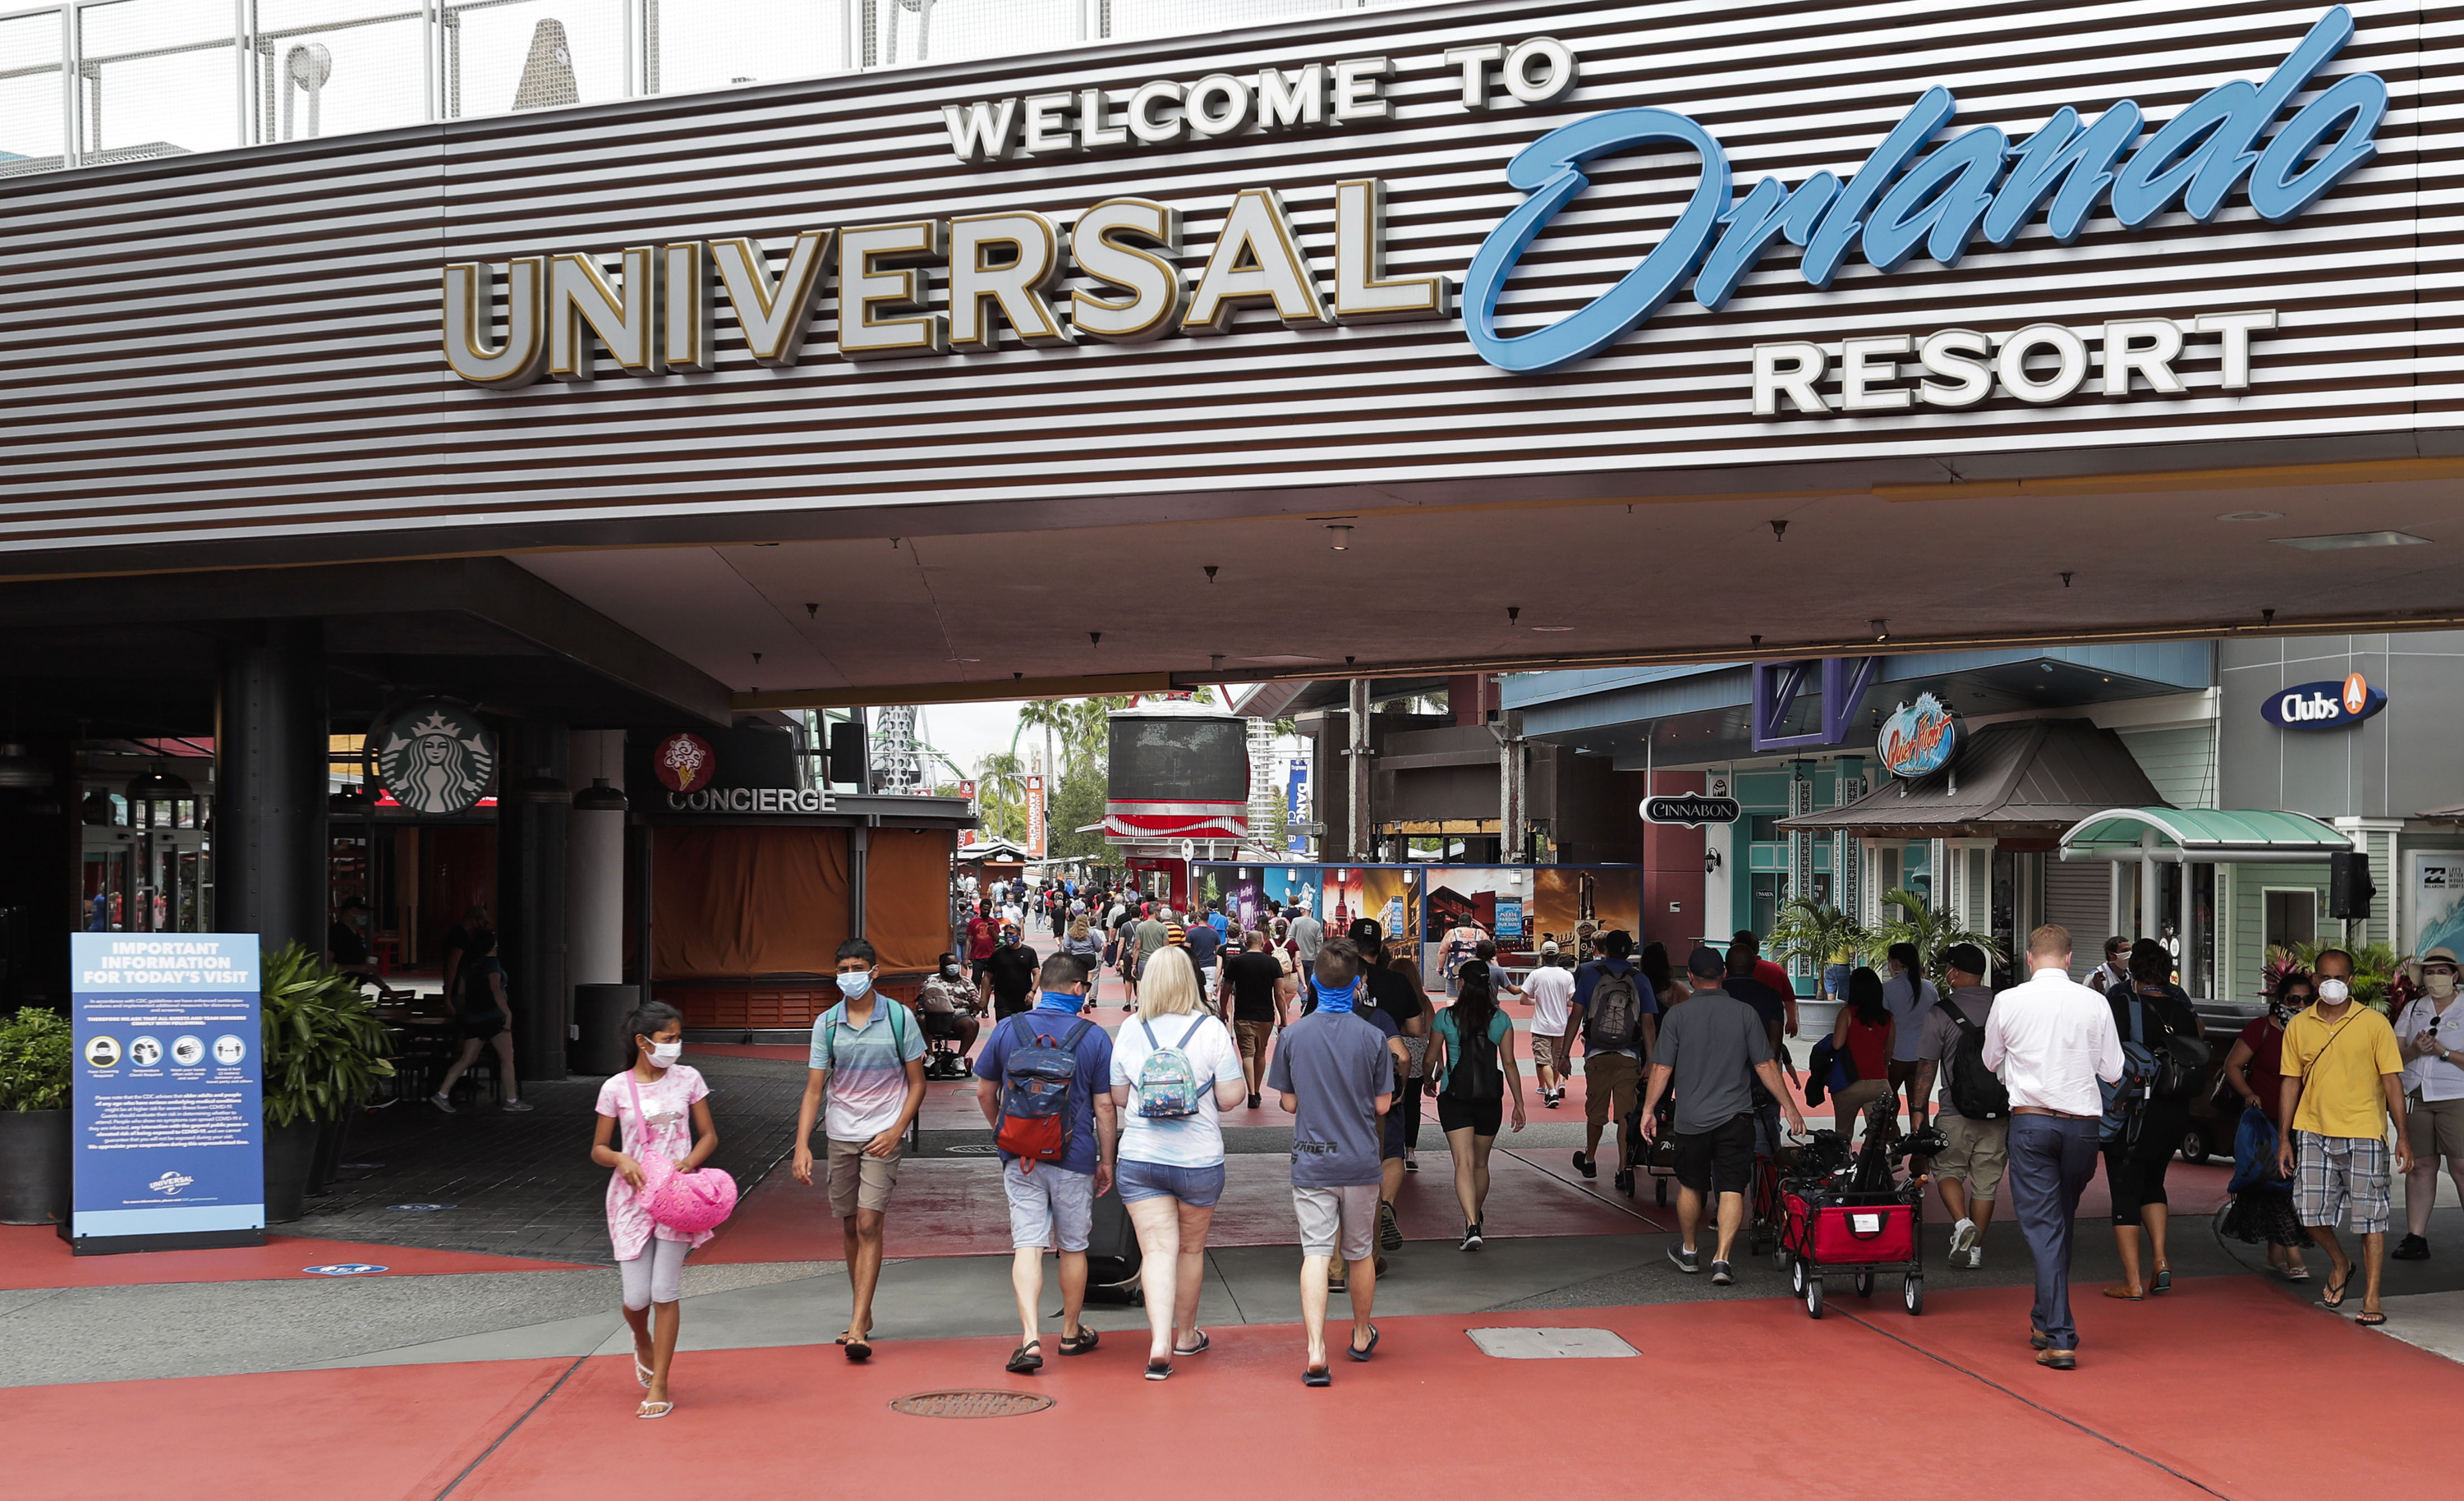 Universal Announces Plans for New Theme Park in Texas — What We Know So Far